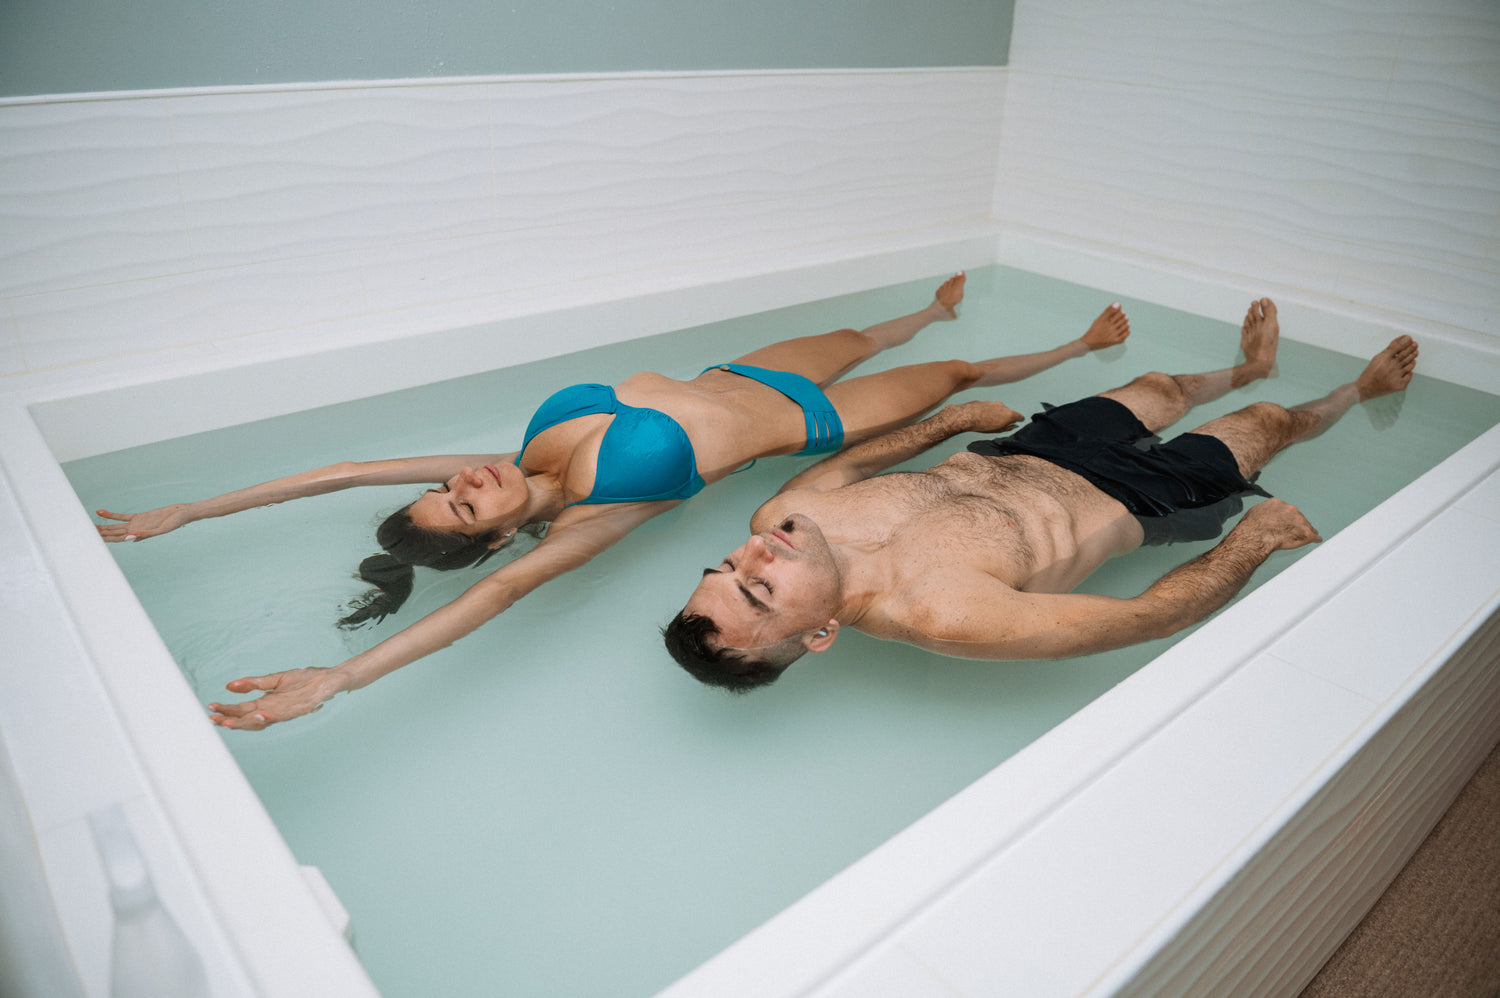 couple relaxing and enjoying the open tank float room together